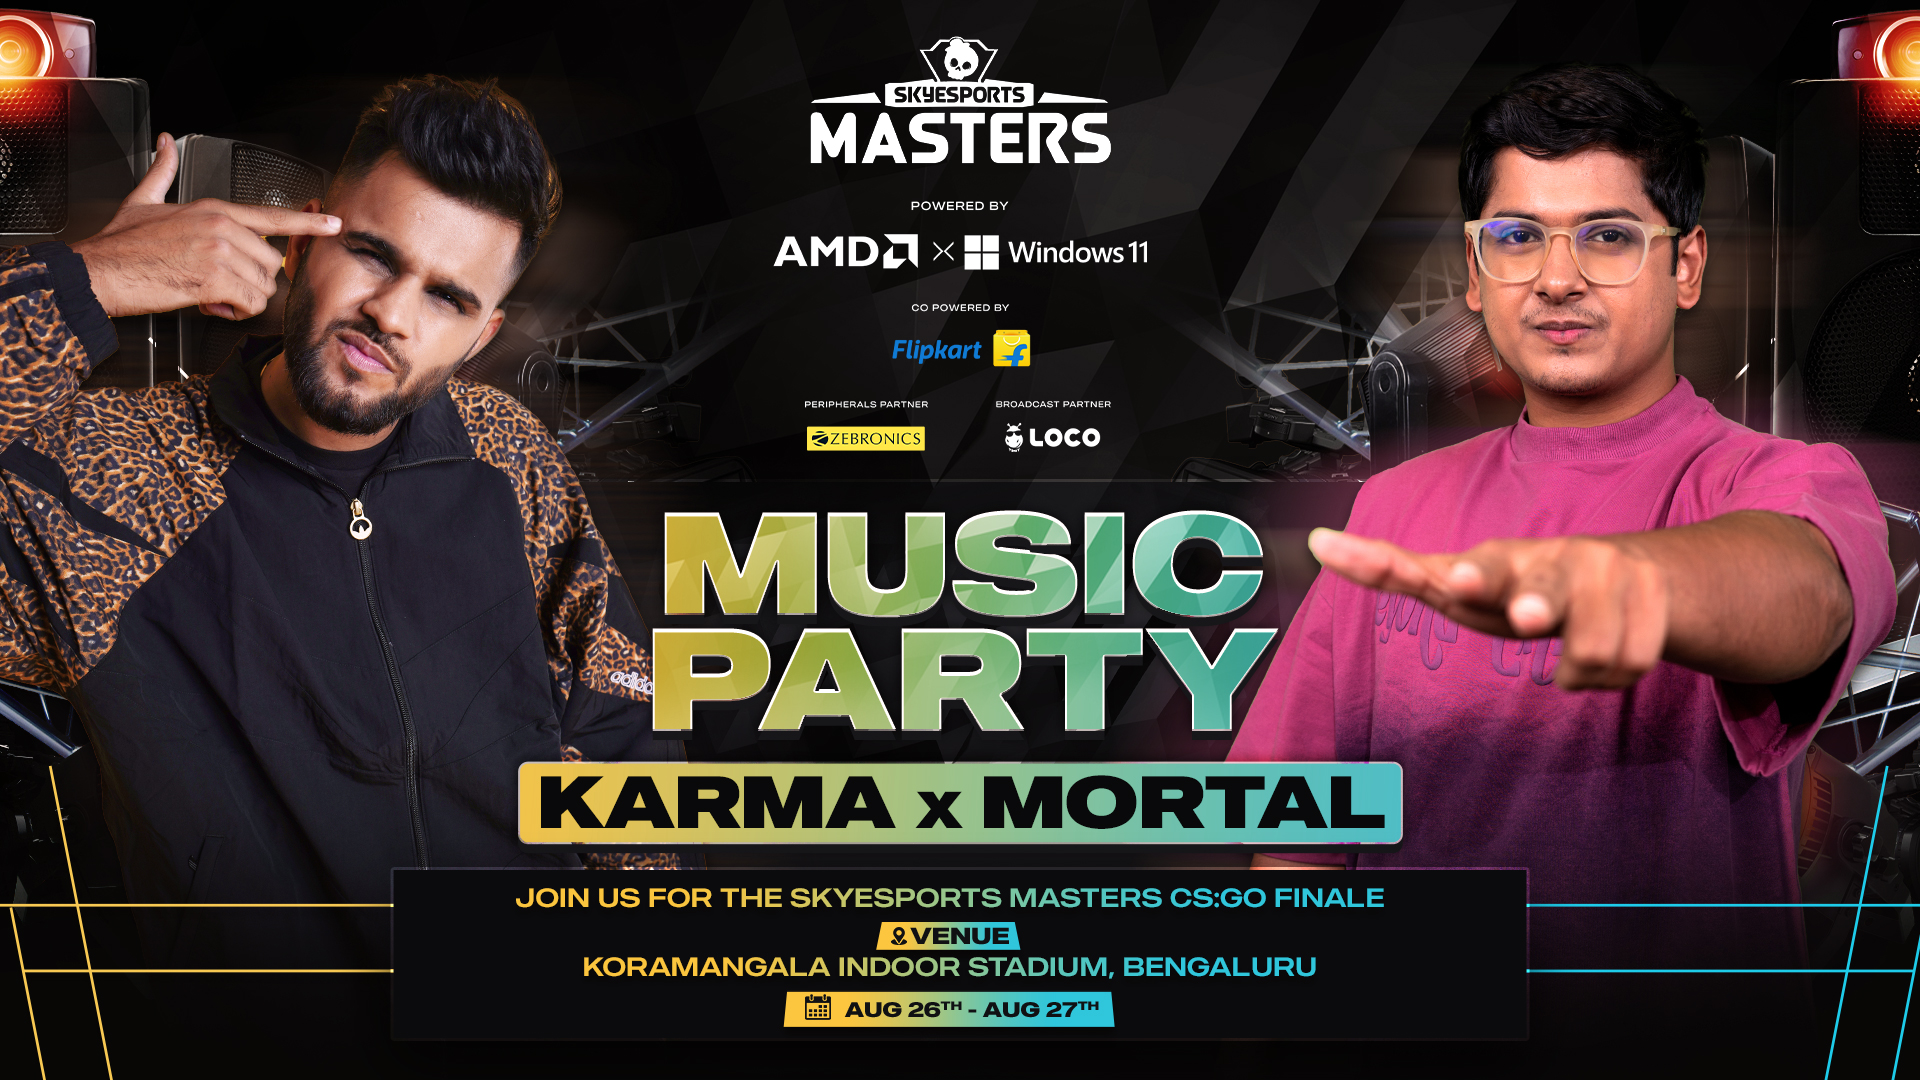 Skyesports Masters to feature Live Performance by Karma and Mortal